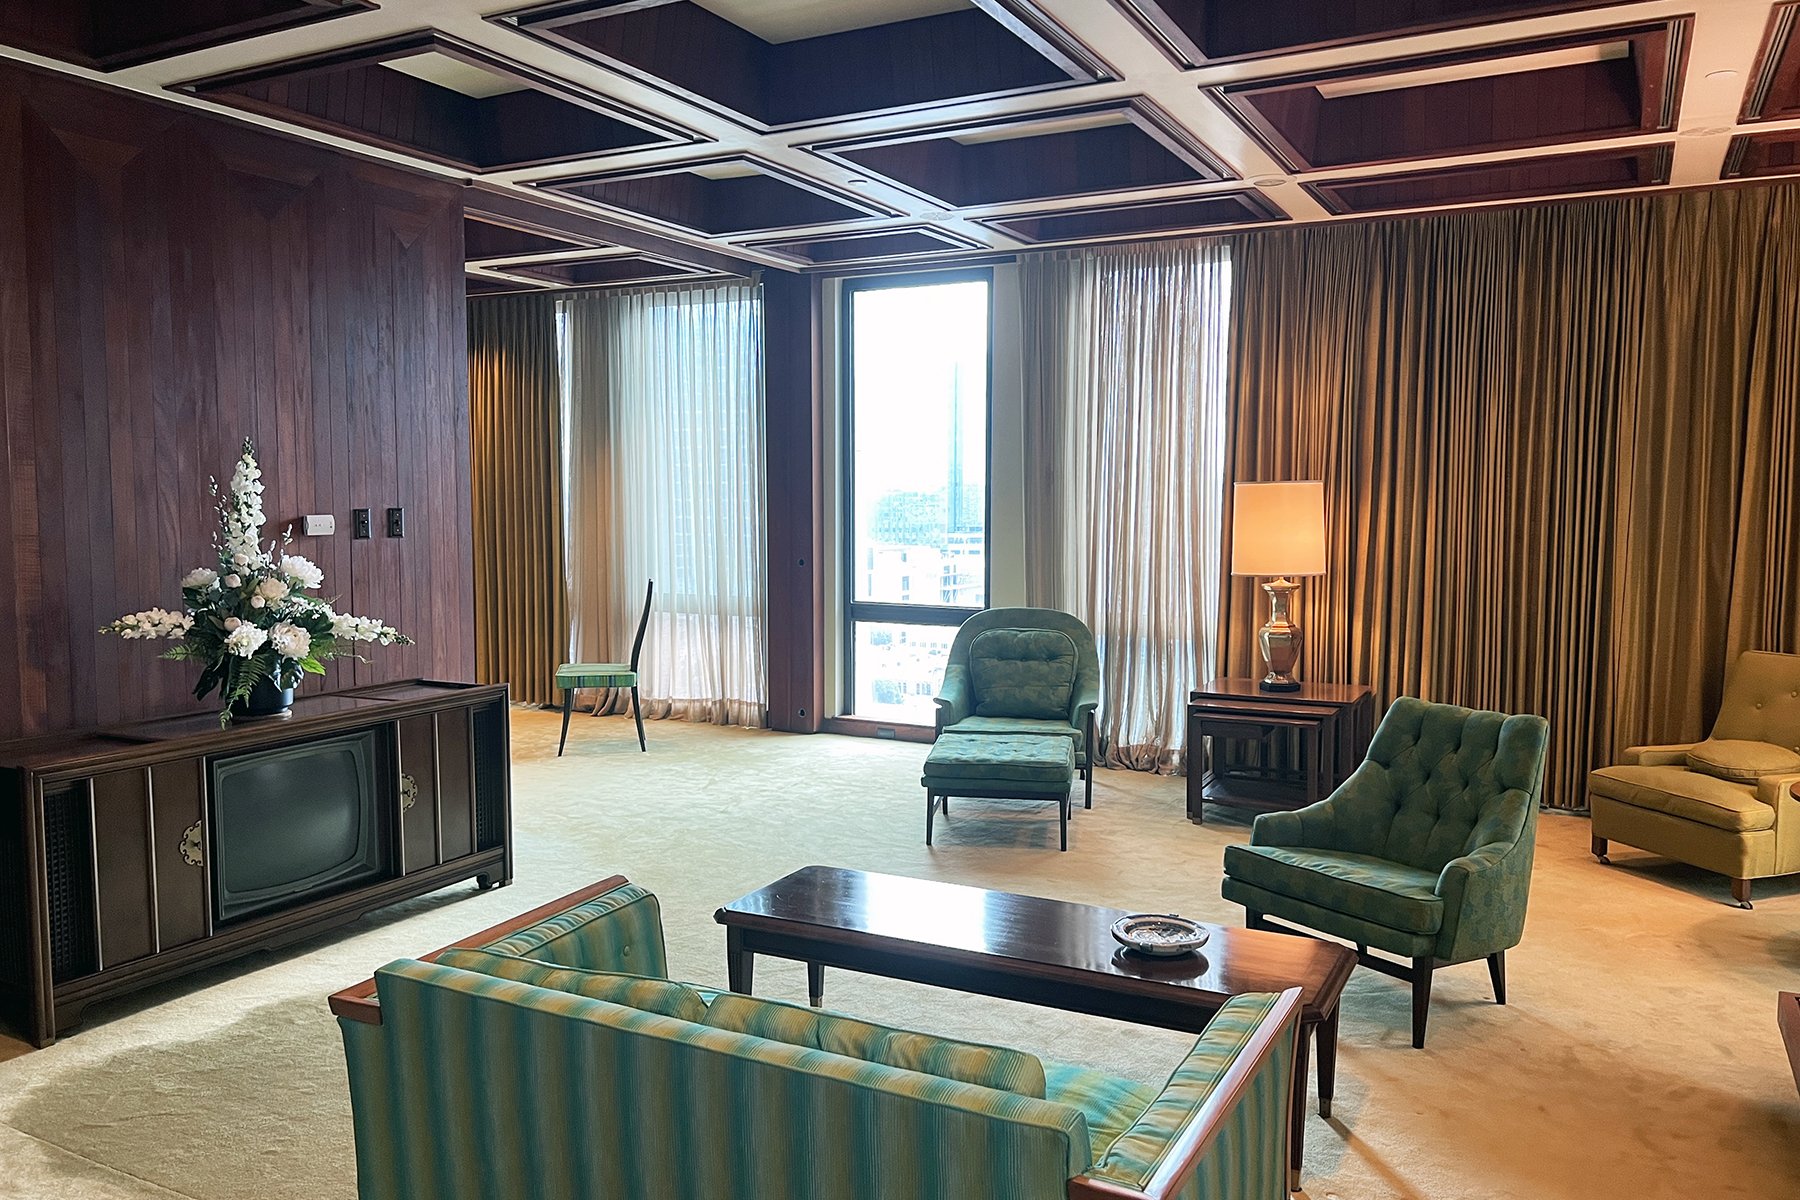   U.S. GENERAL SERVICES ADMINISTRATION Stewardship Award for LBJ Suite Furnishings Conservation  Photo: GSA/Cushing Terrell  